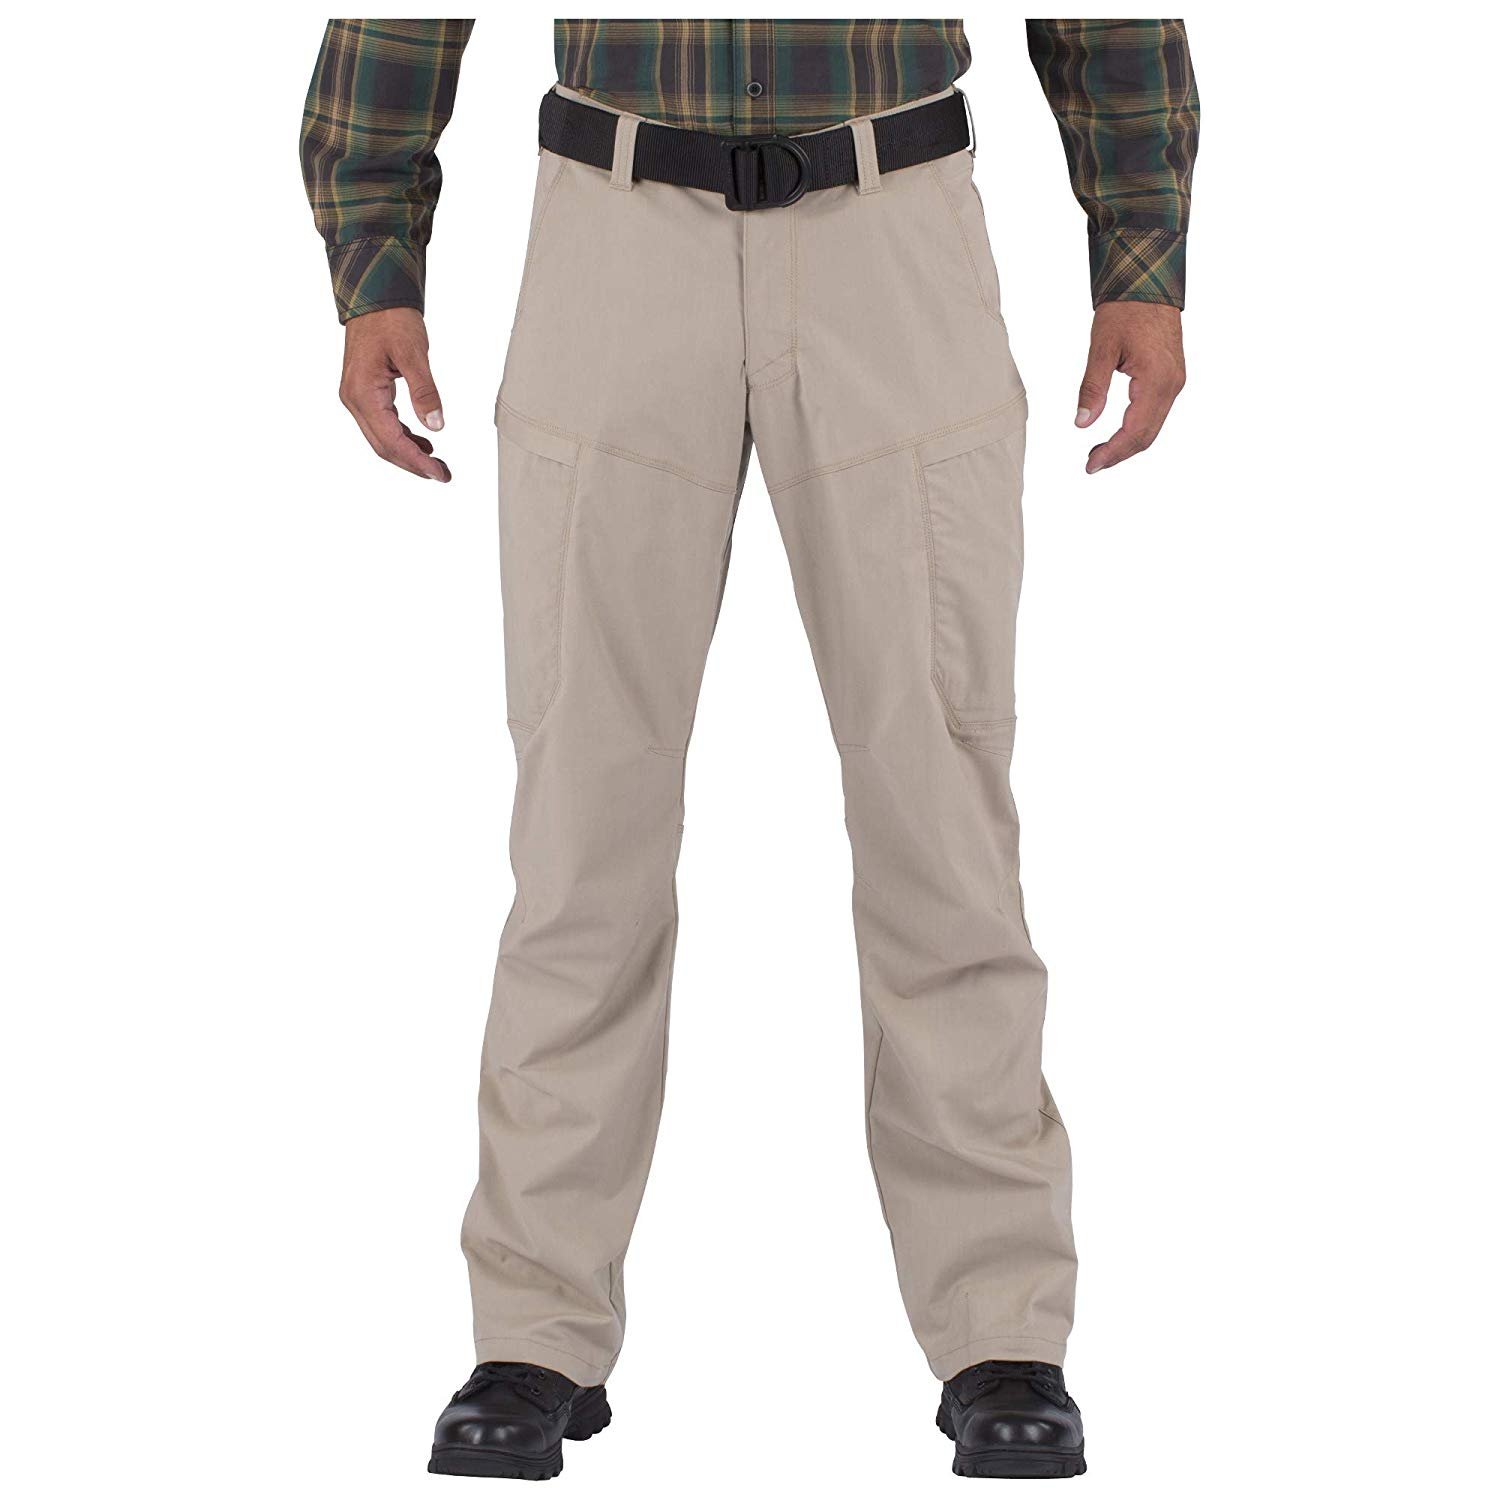 Gusseted Teflon Finish Style 74434 5.11 Tactical Men's Apex Cargo Work Pants Flex-Tac Stretch Fabric 